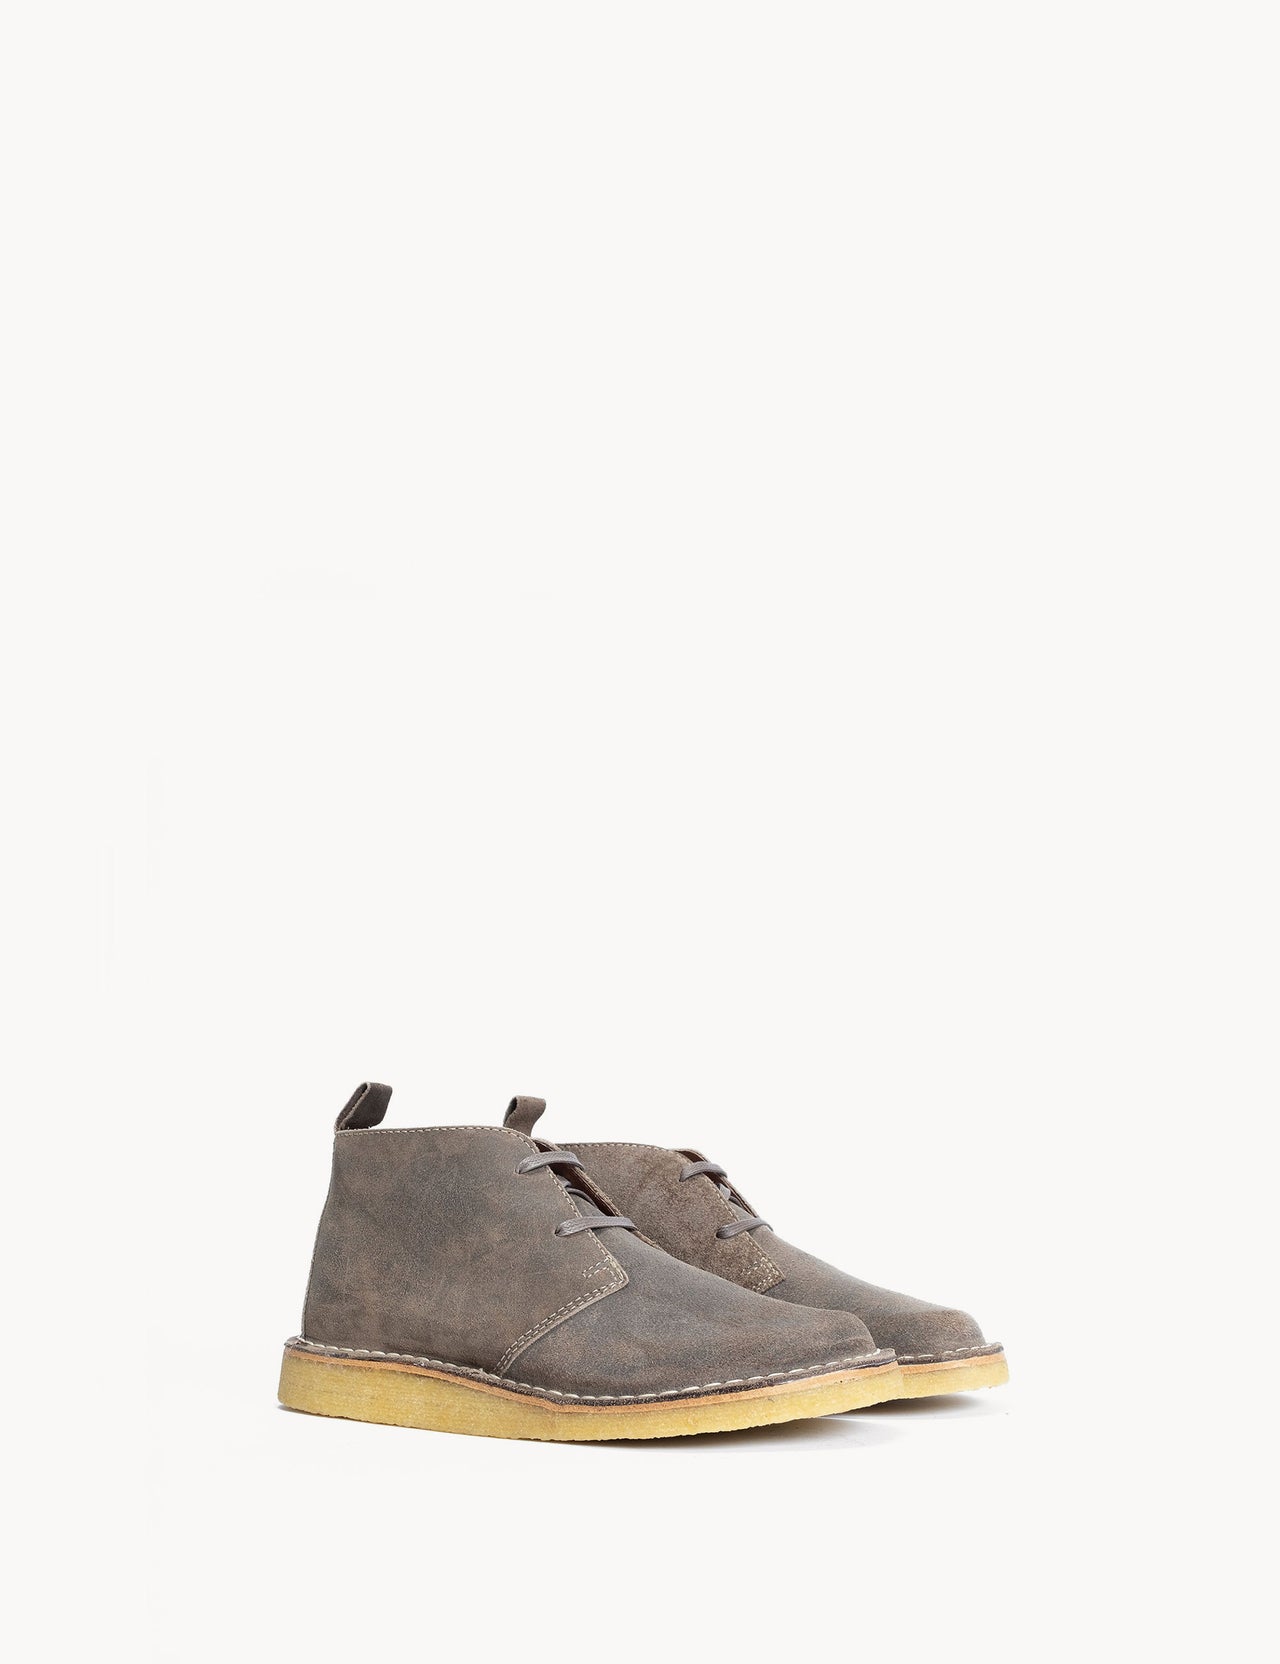 Silja In Taupe Waxed Suede With a Crepe Sole